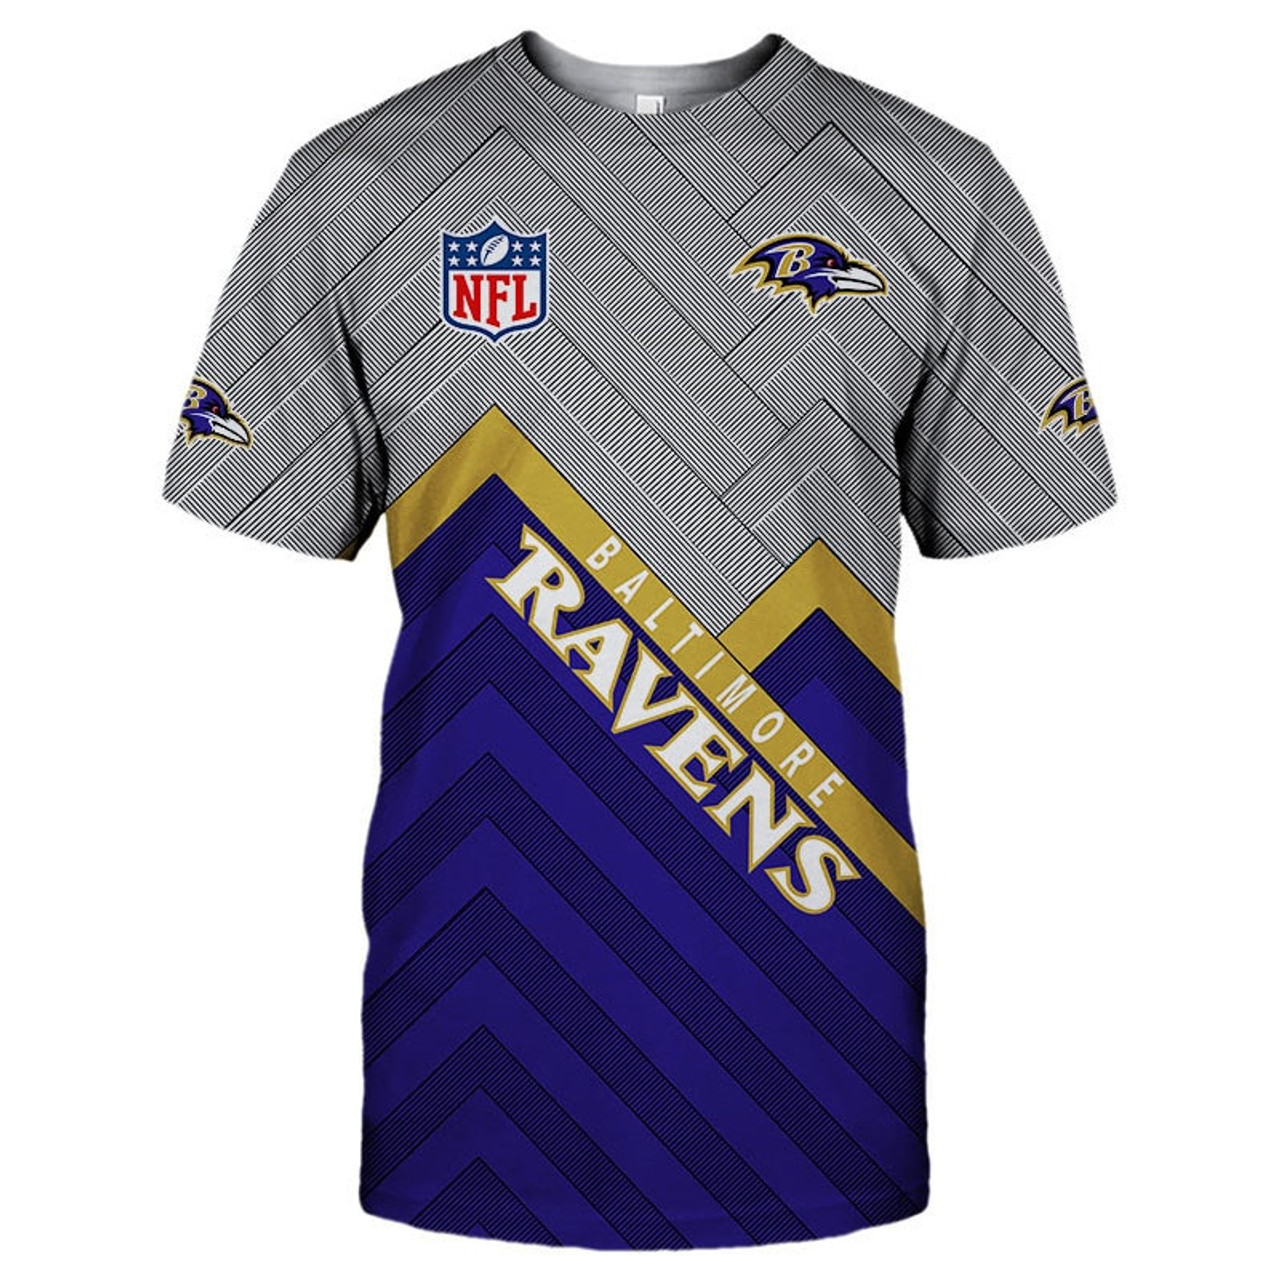 what brand is the official nfl jersey